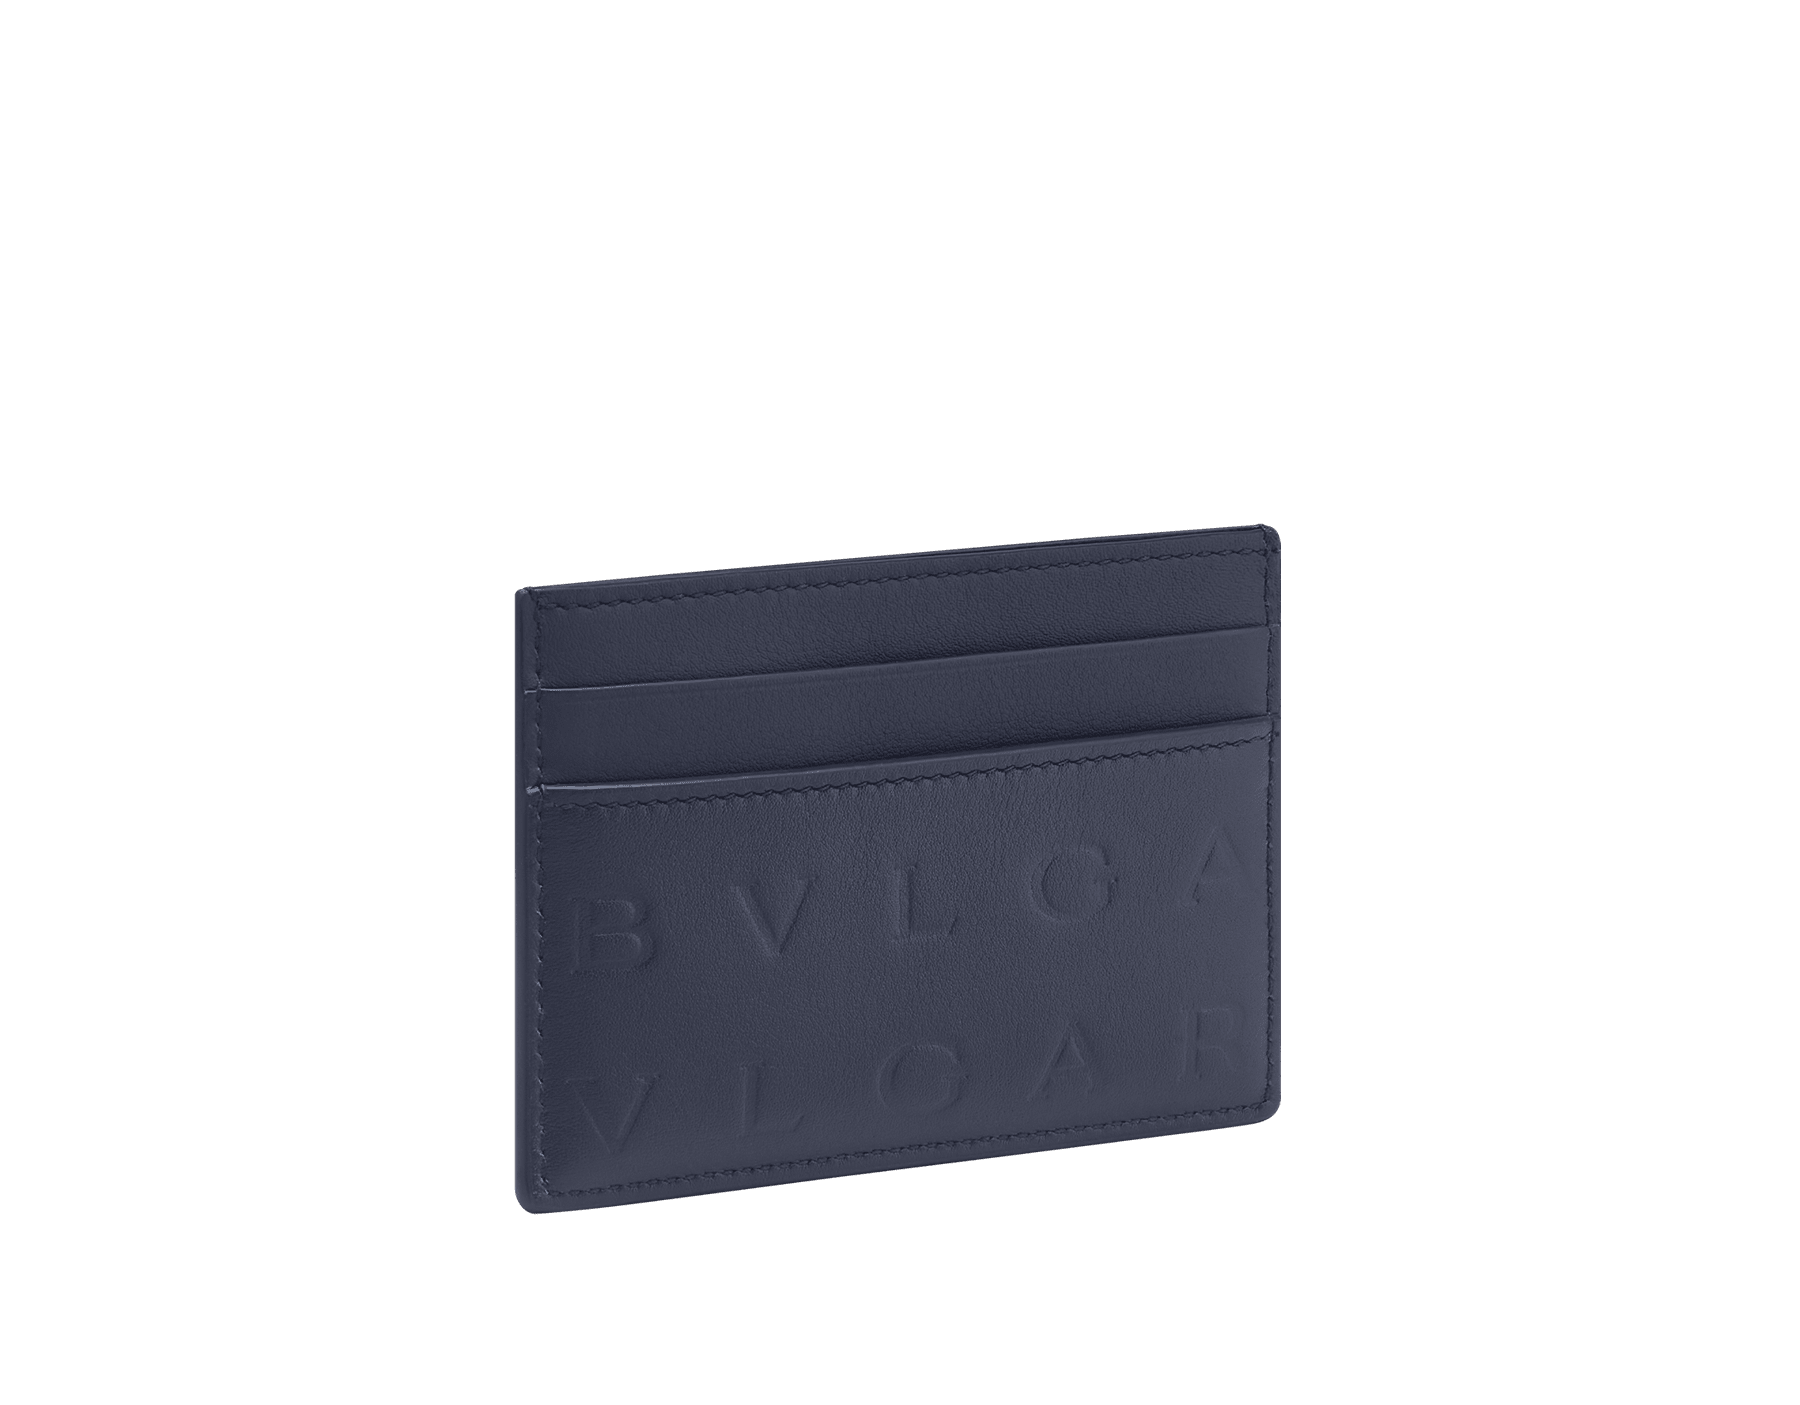 Bulgari Logo card holder in ivy onyx greenish-grey calf leather with iconic hot-stamped Infinitum pattern all over. BVL-CCHOLDERb image 1